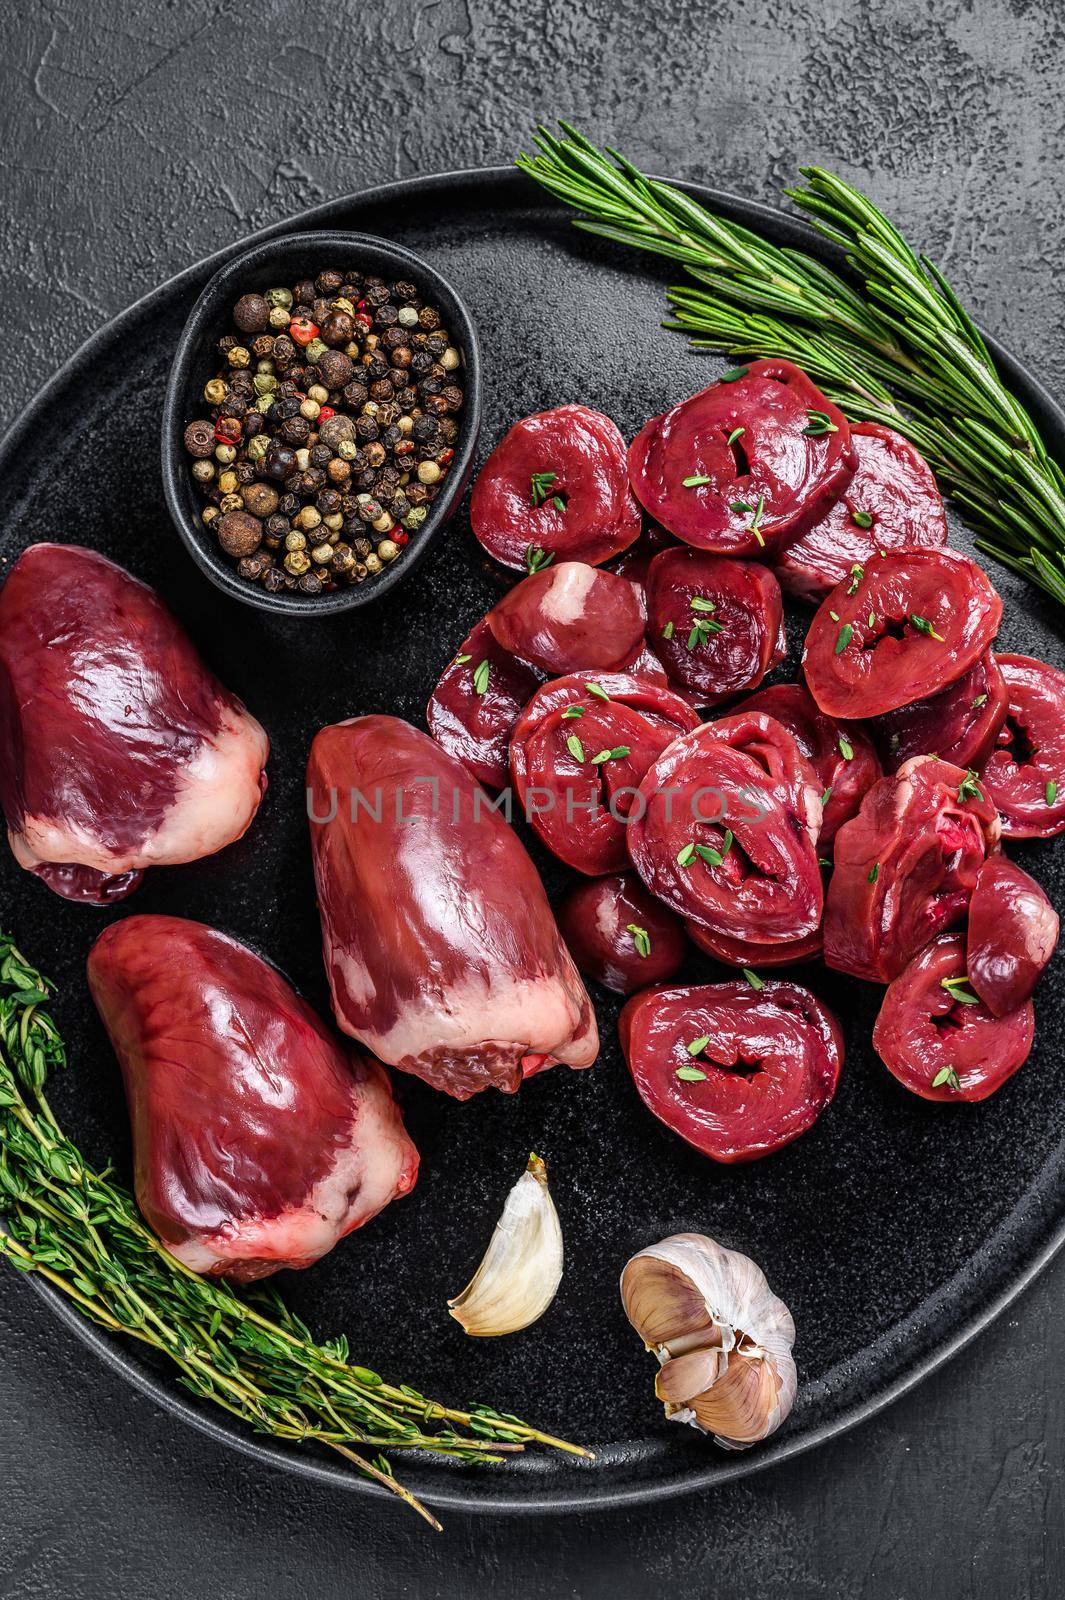 Sliced Raw turkey hearts ready for cooking. Black background. Top view by Composter